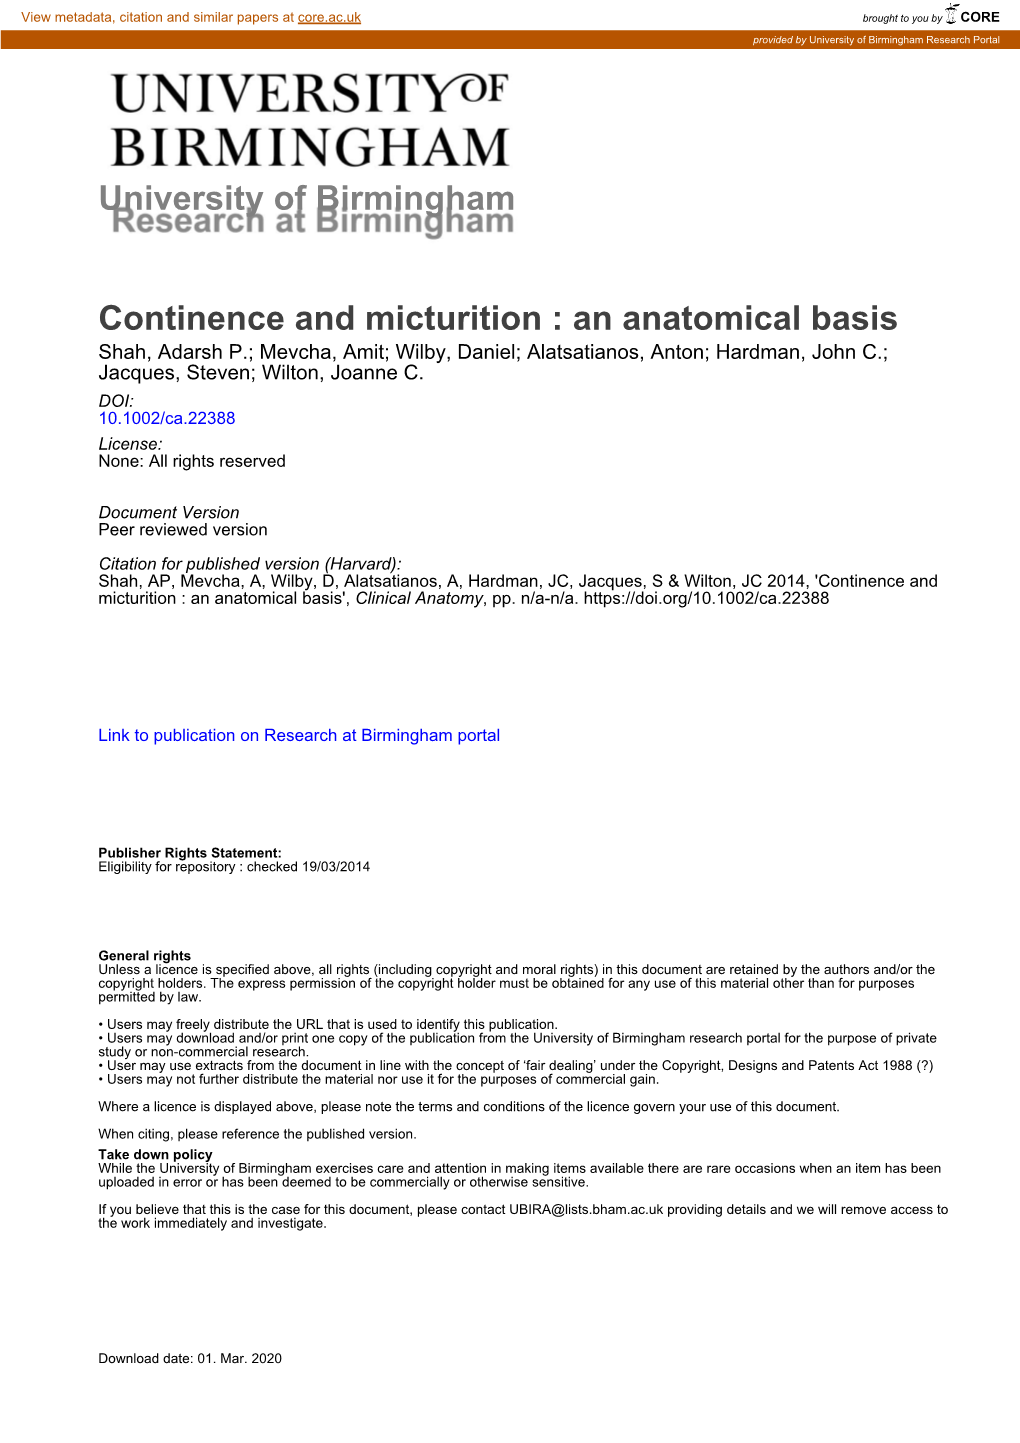 Continence and Micturition : an Anatomical Basis